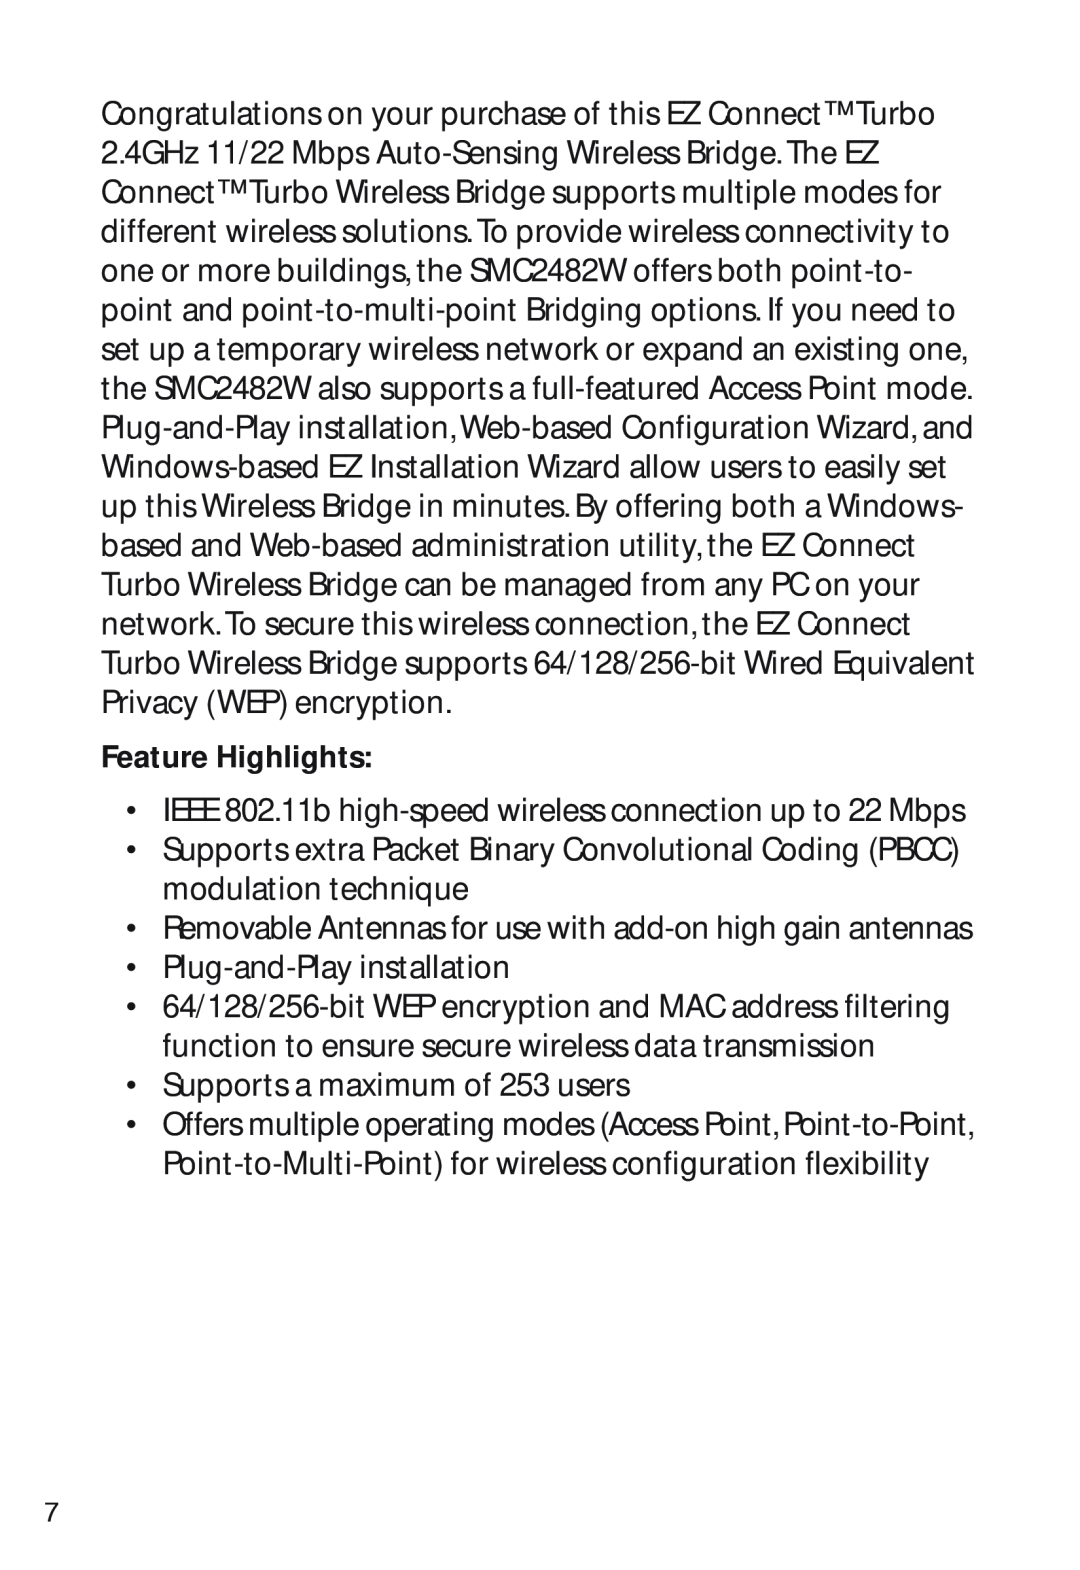 SMC Networks SMC2482W manual Feature Highlights, IEEE 802.11b high-speed wireless connection up to 22 Mbps 